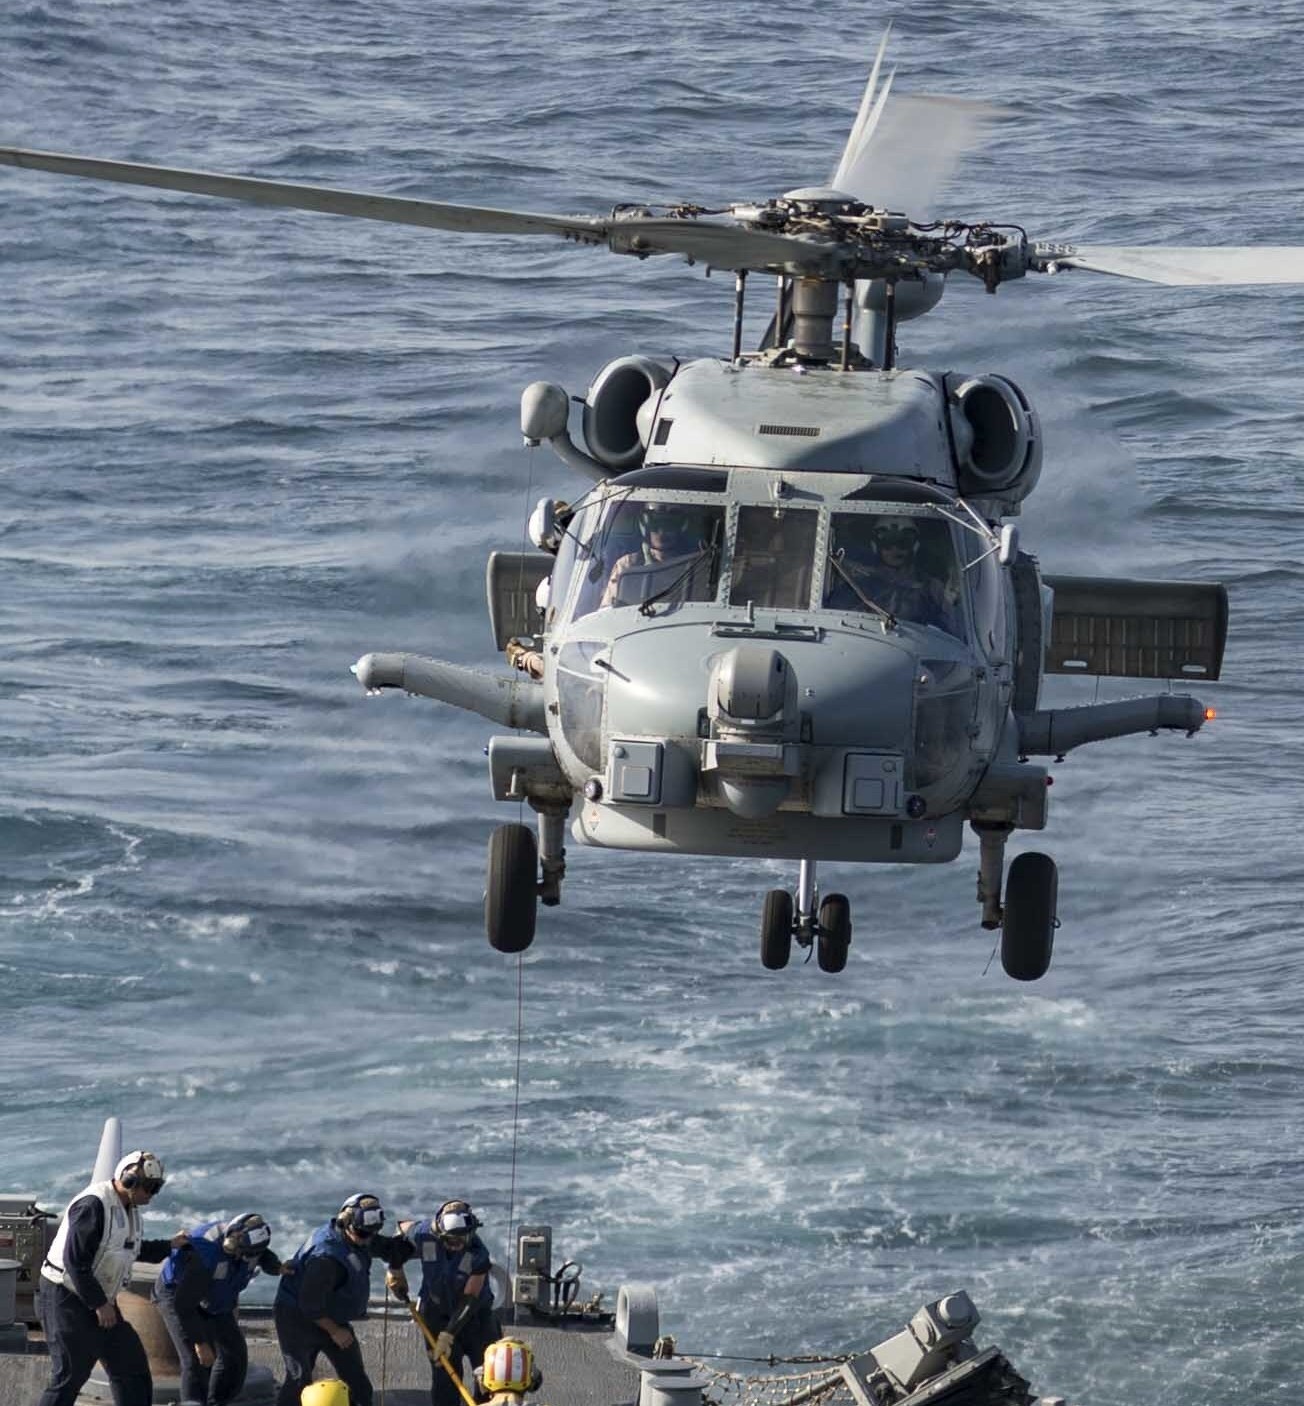 hsm-74 swamp foxes helicopter maritime strike squadron us navy mh-60r seahawk 2016 79